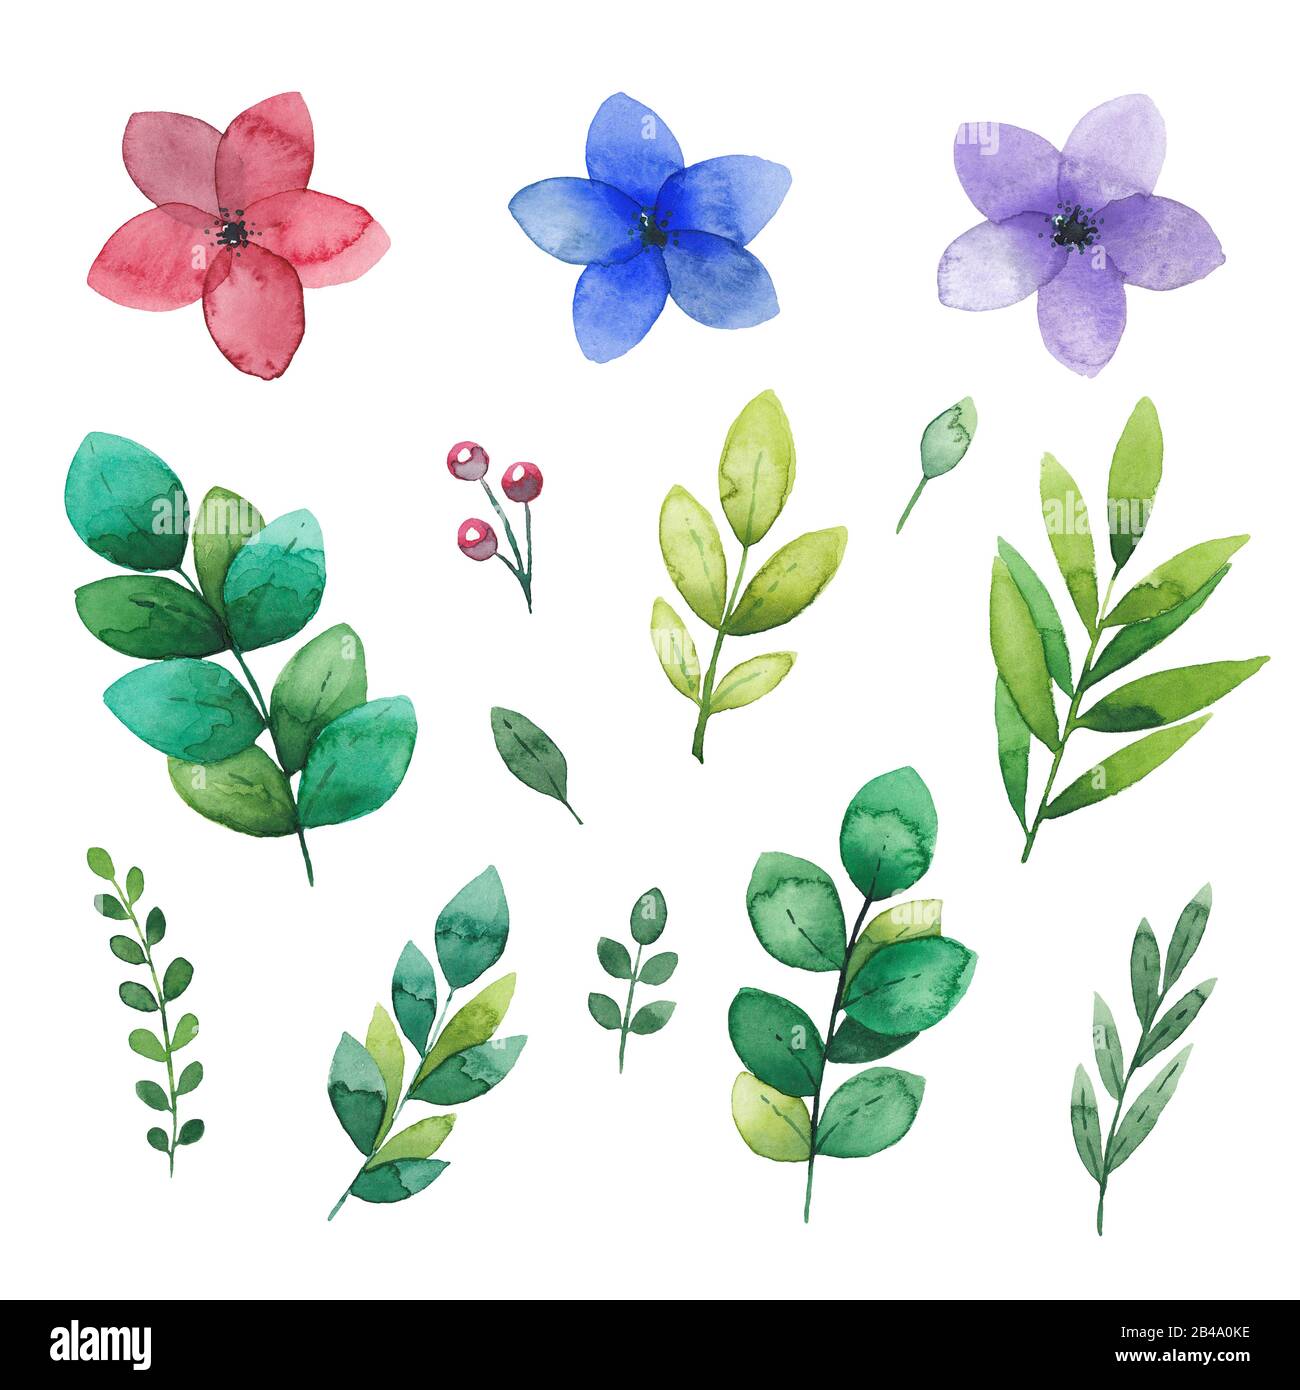 Watercolor floral elements set of forest flowers and leaves isolated on white Stock Photo